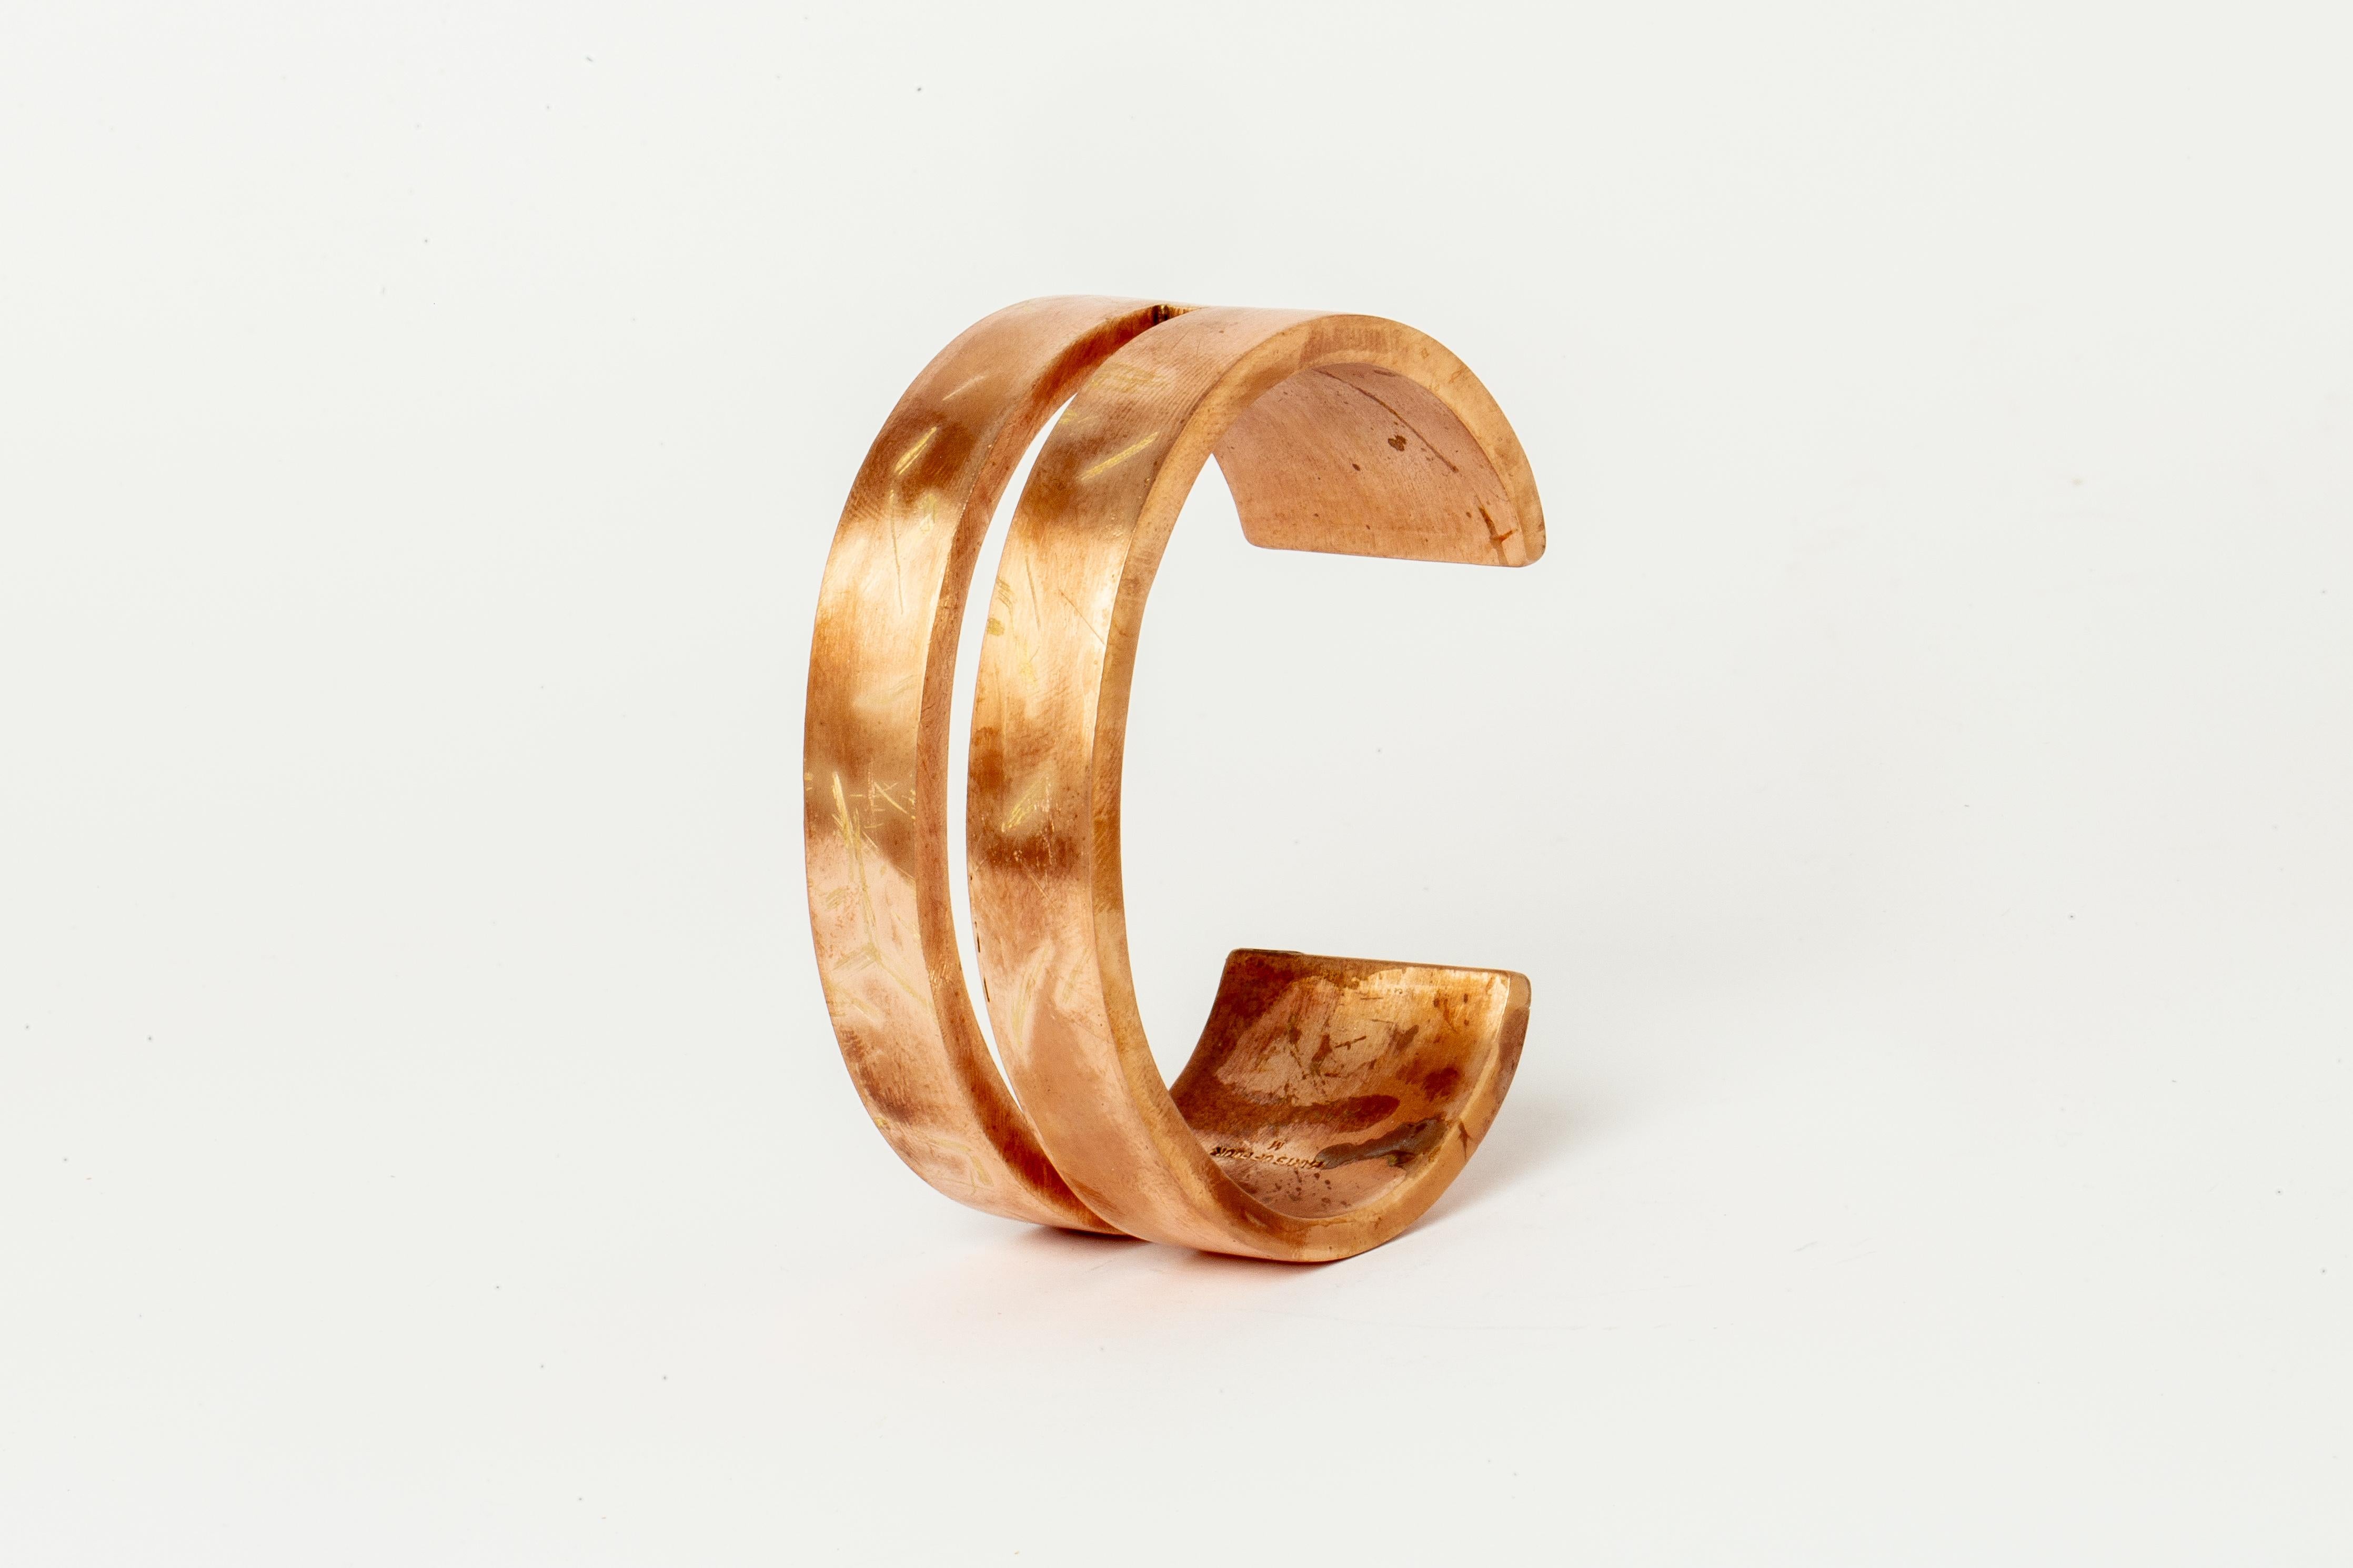 Bracelet in brass. Brass substrate is electroplated with 18k Rose Gold and then dipped into acid to create the subtly destroyed surface. This piece is 100% hand fabricated from metal plate; cut into sections and soldered together to make the hollow